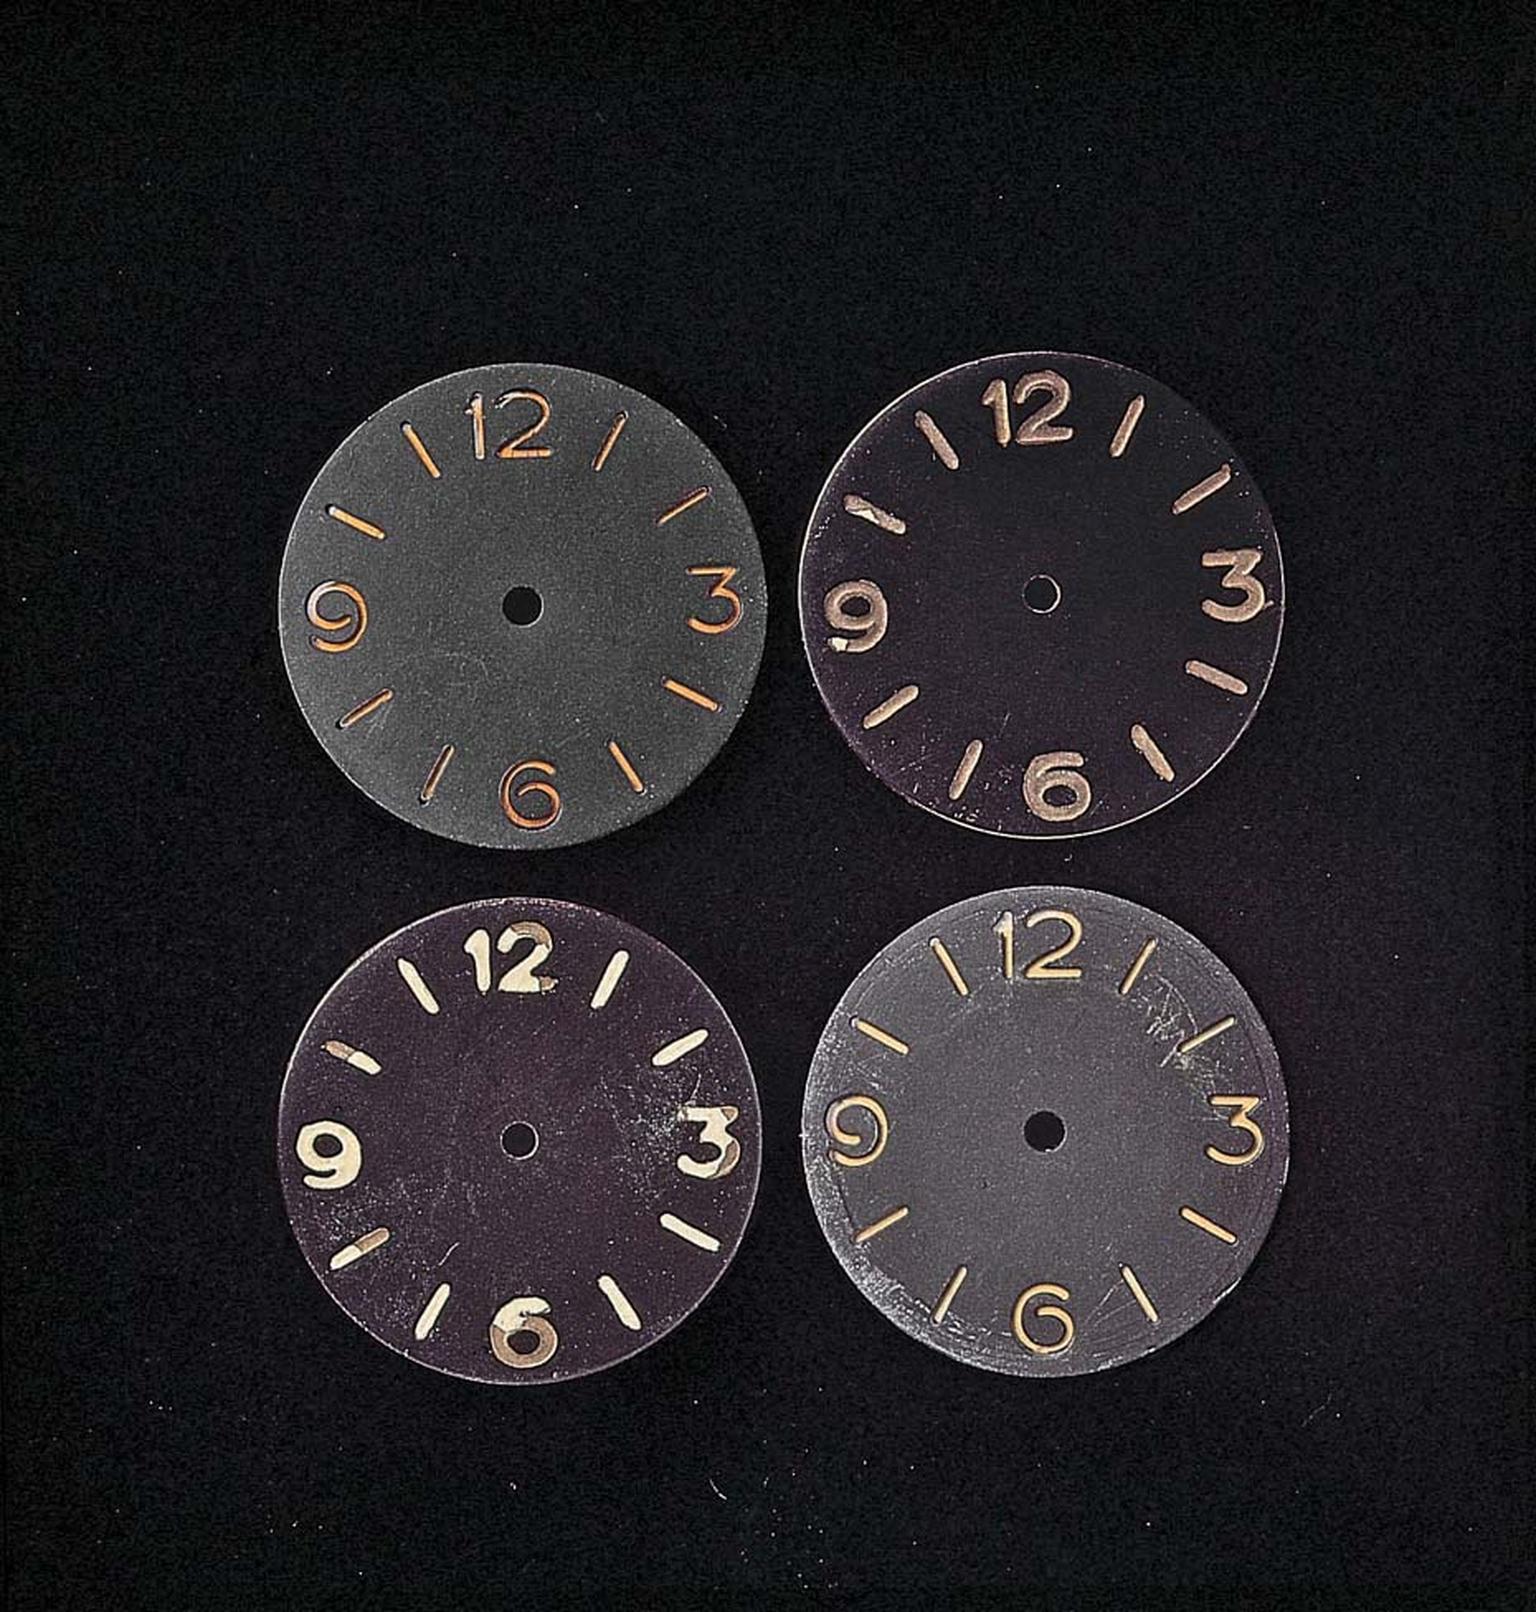 Dials of the Radimoir watch in 1938 were simplified and displayed just four large Arabic numerals. The luminescence of the watch was achieved thanks to the use of a sandwich dial consisting of two overlapping plates. The upper dial featured the four large